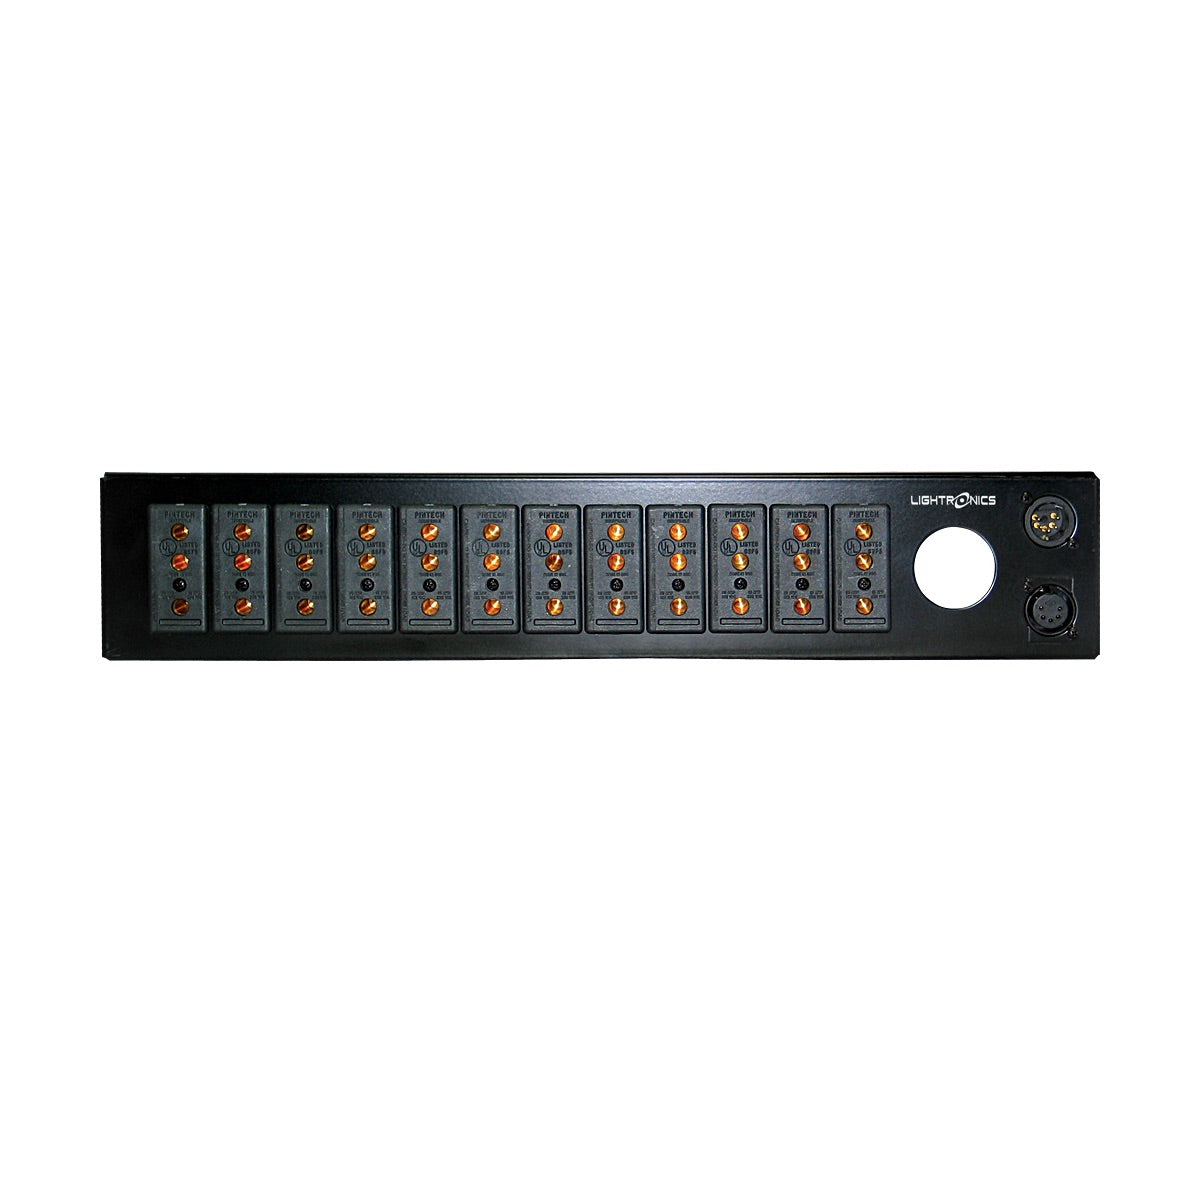 Lightronics RE121L Rack Mount Dimmer, RE Series, rear Stagepin Outlet Panel